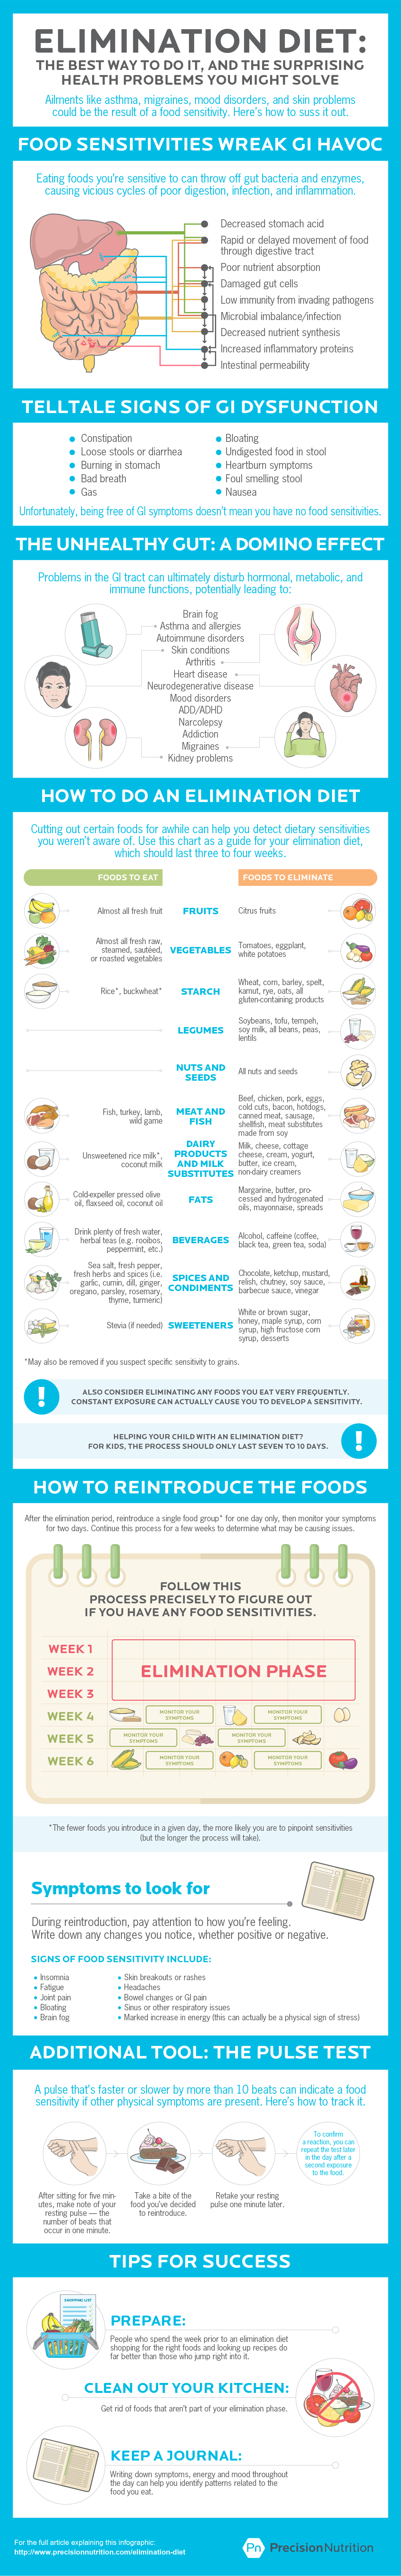 How food sensitivities can prevent you from reaching your health and fitness goals. [Infographic]